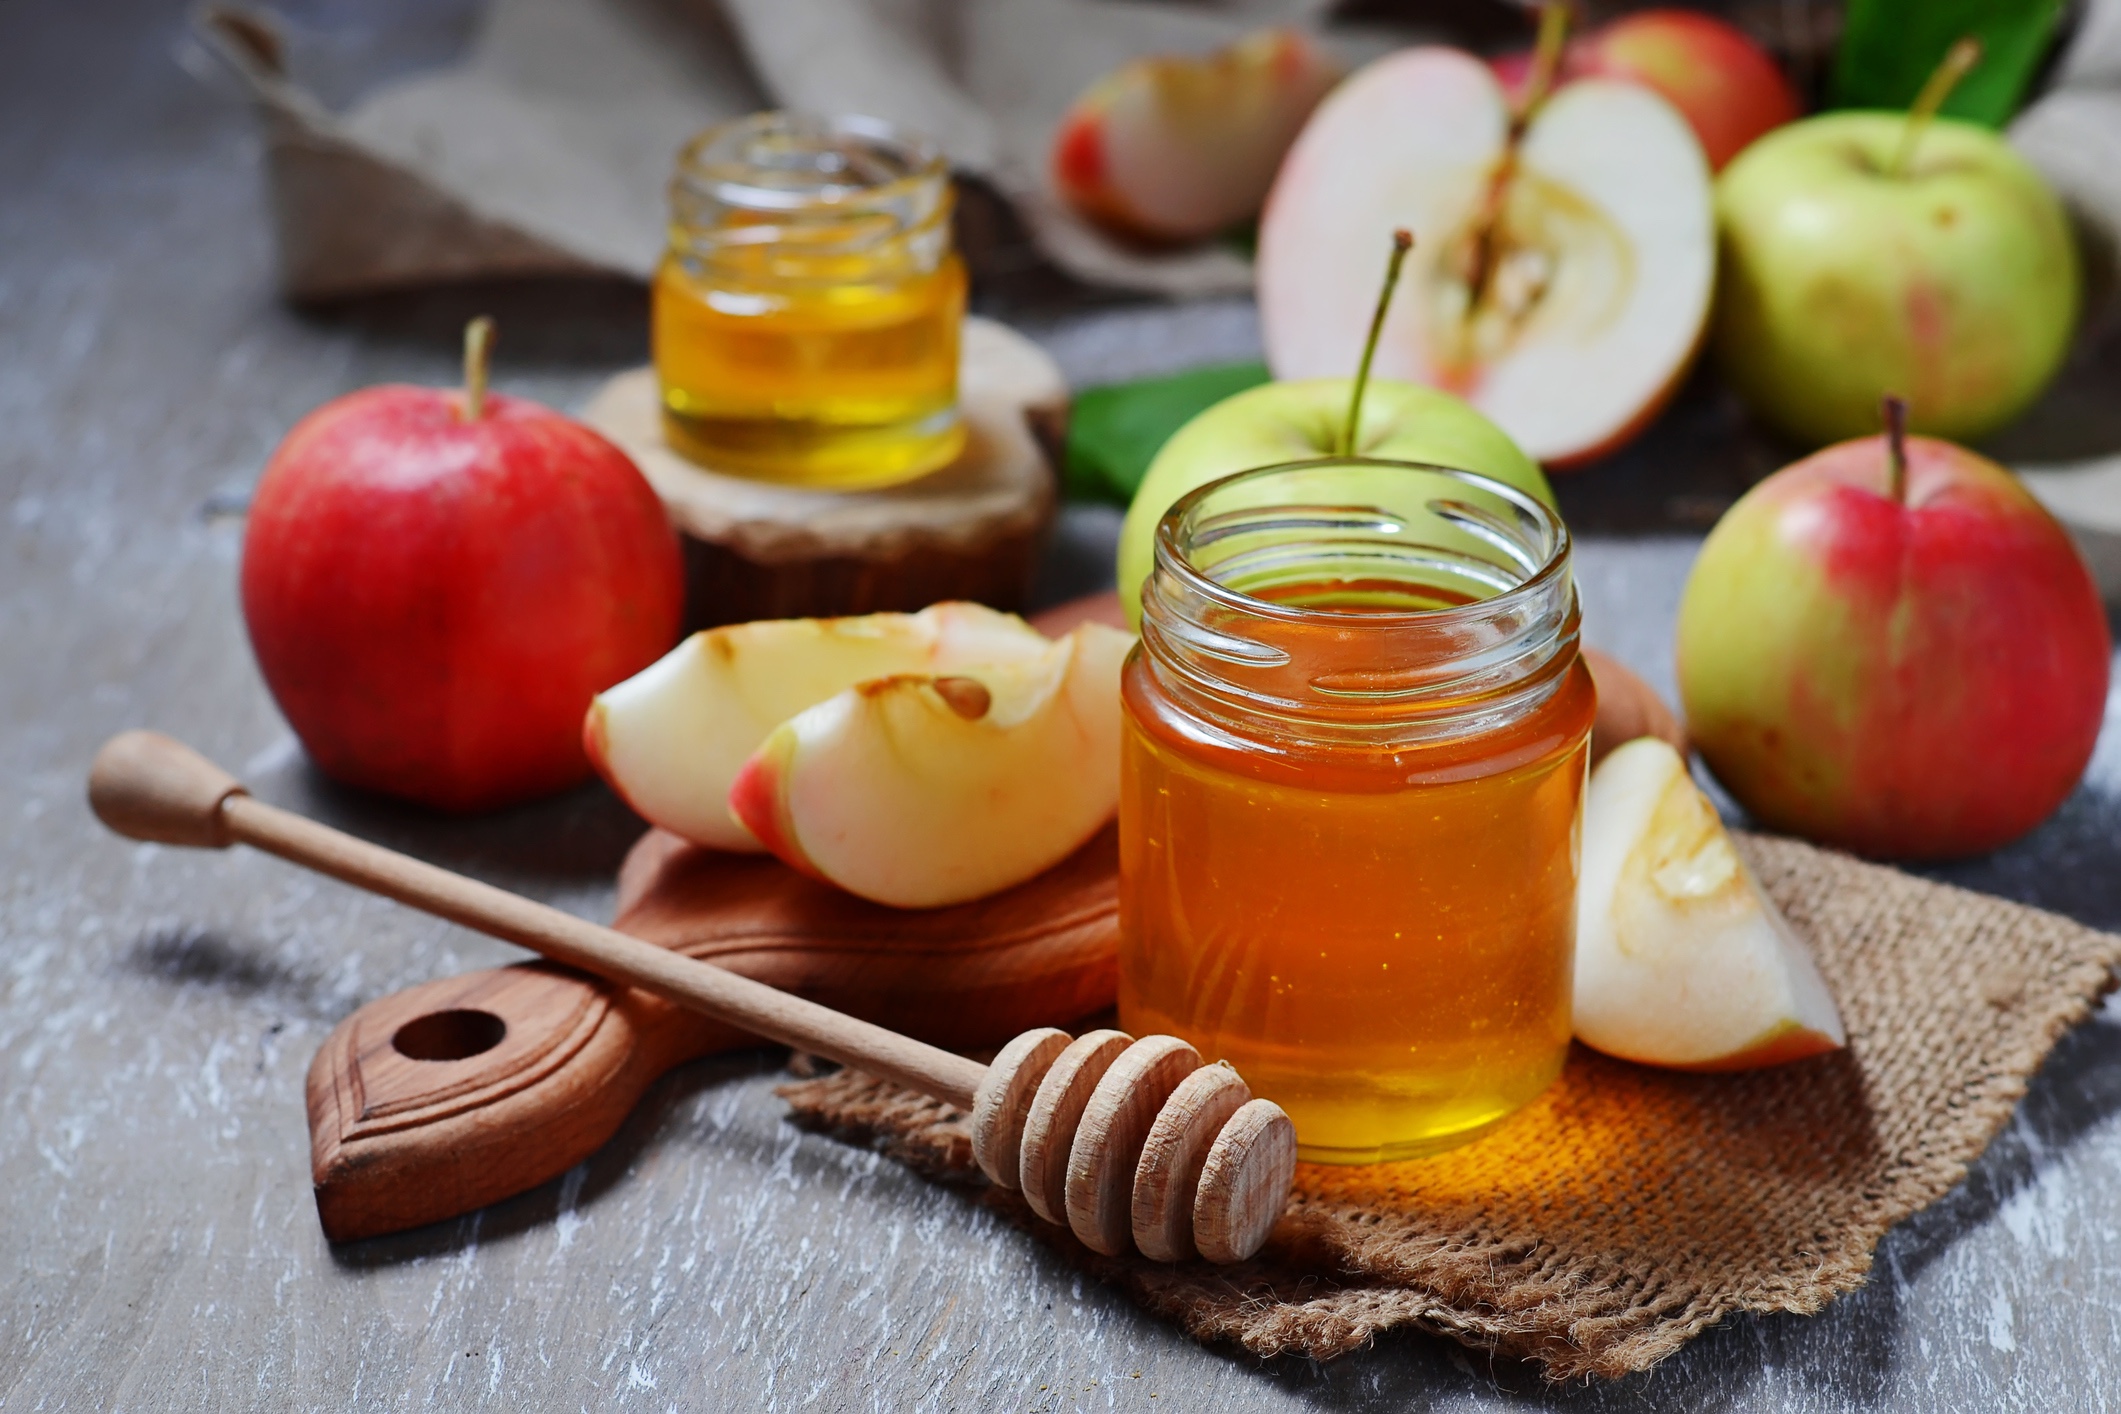 Apples with honey for Rosh Hashanah